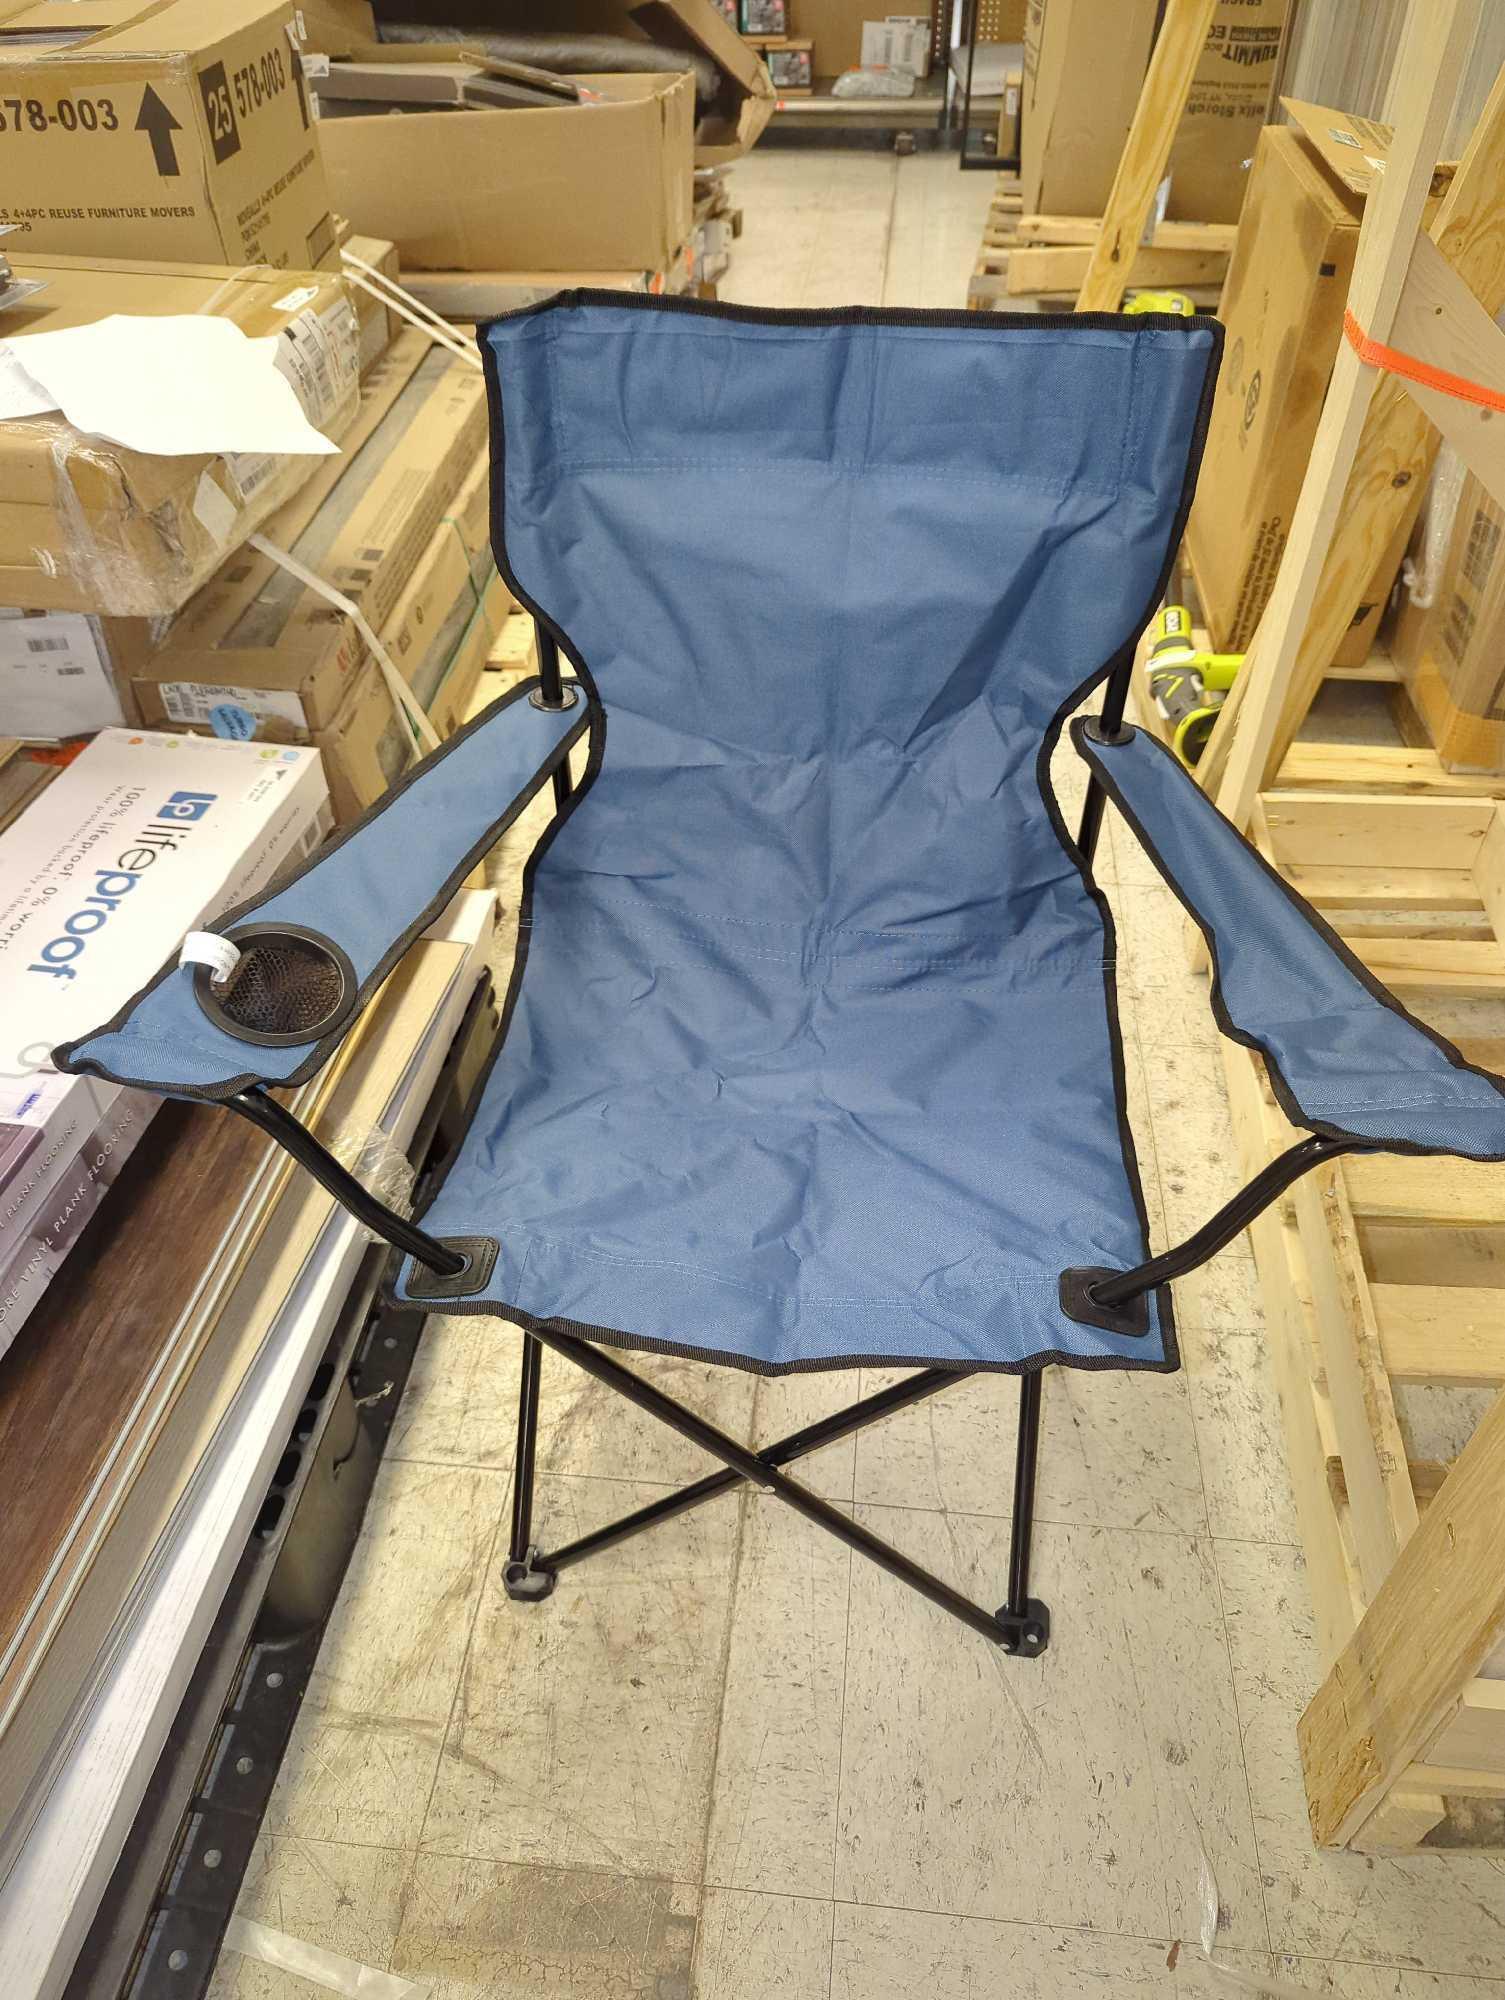 Folding Bag Chair with Cupholder in Blue, Retail Price $10, Appears to be New, What You See in the